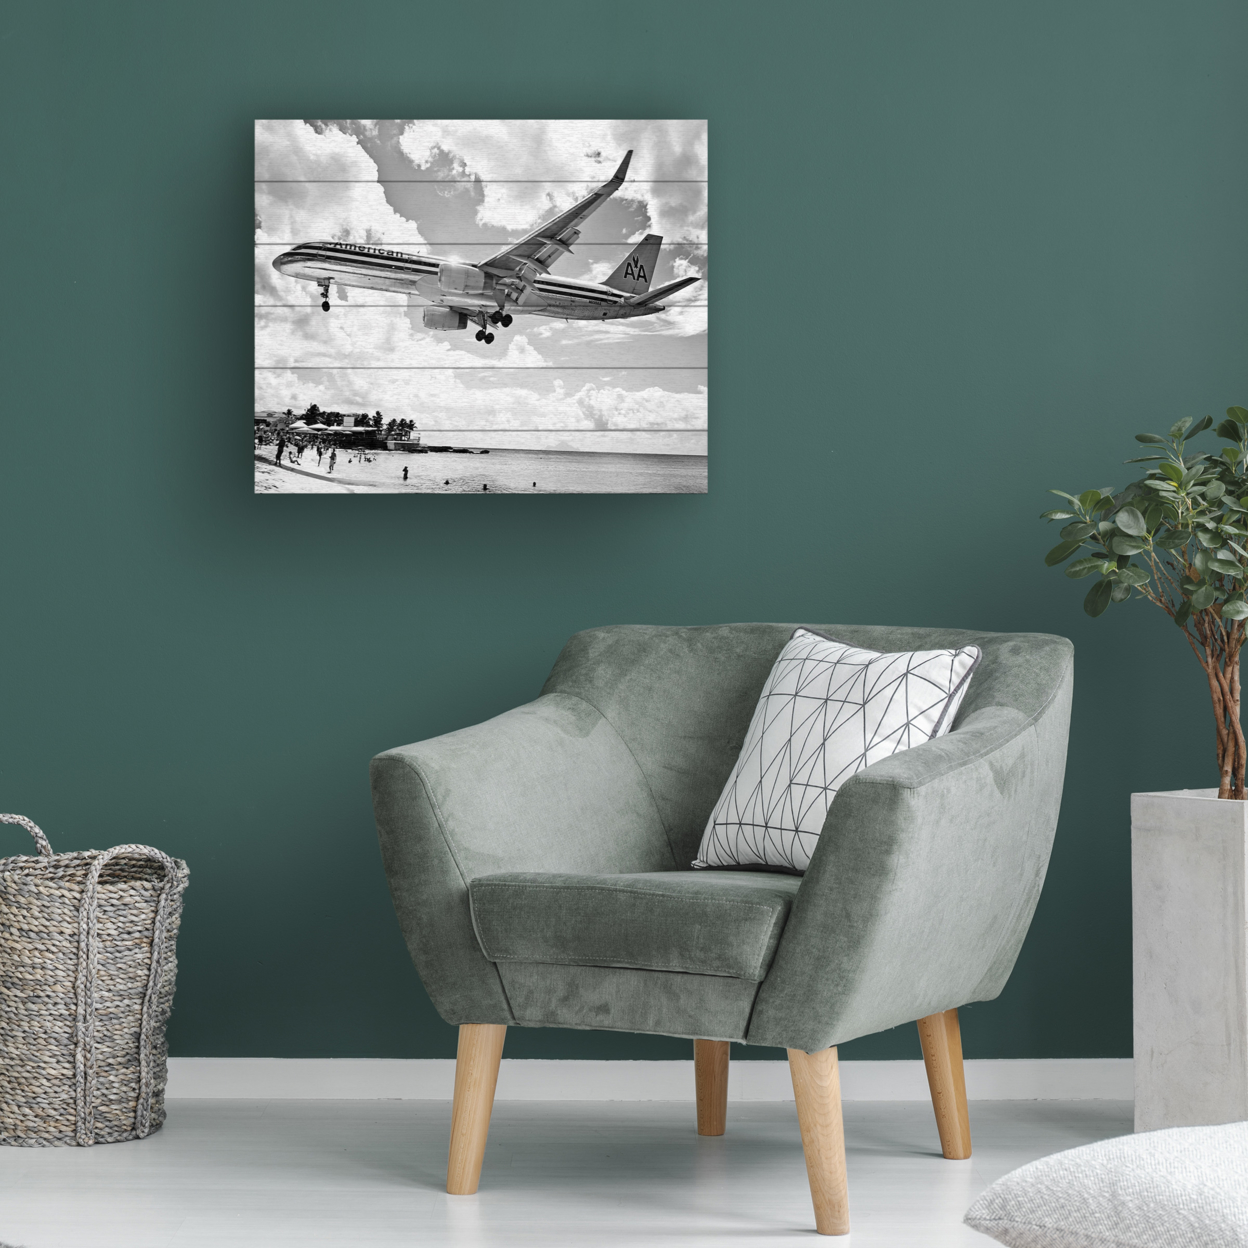 Wooden Slat Art 18 X 22 Inches Titled American Airliner Ready To Hang Home Decor Picture